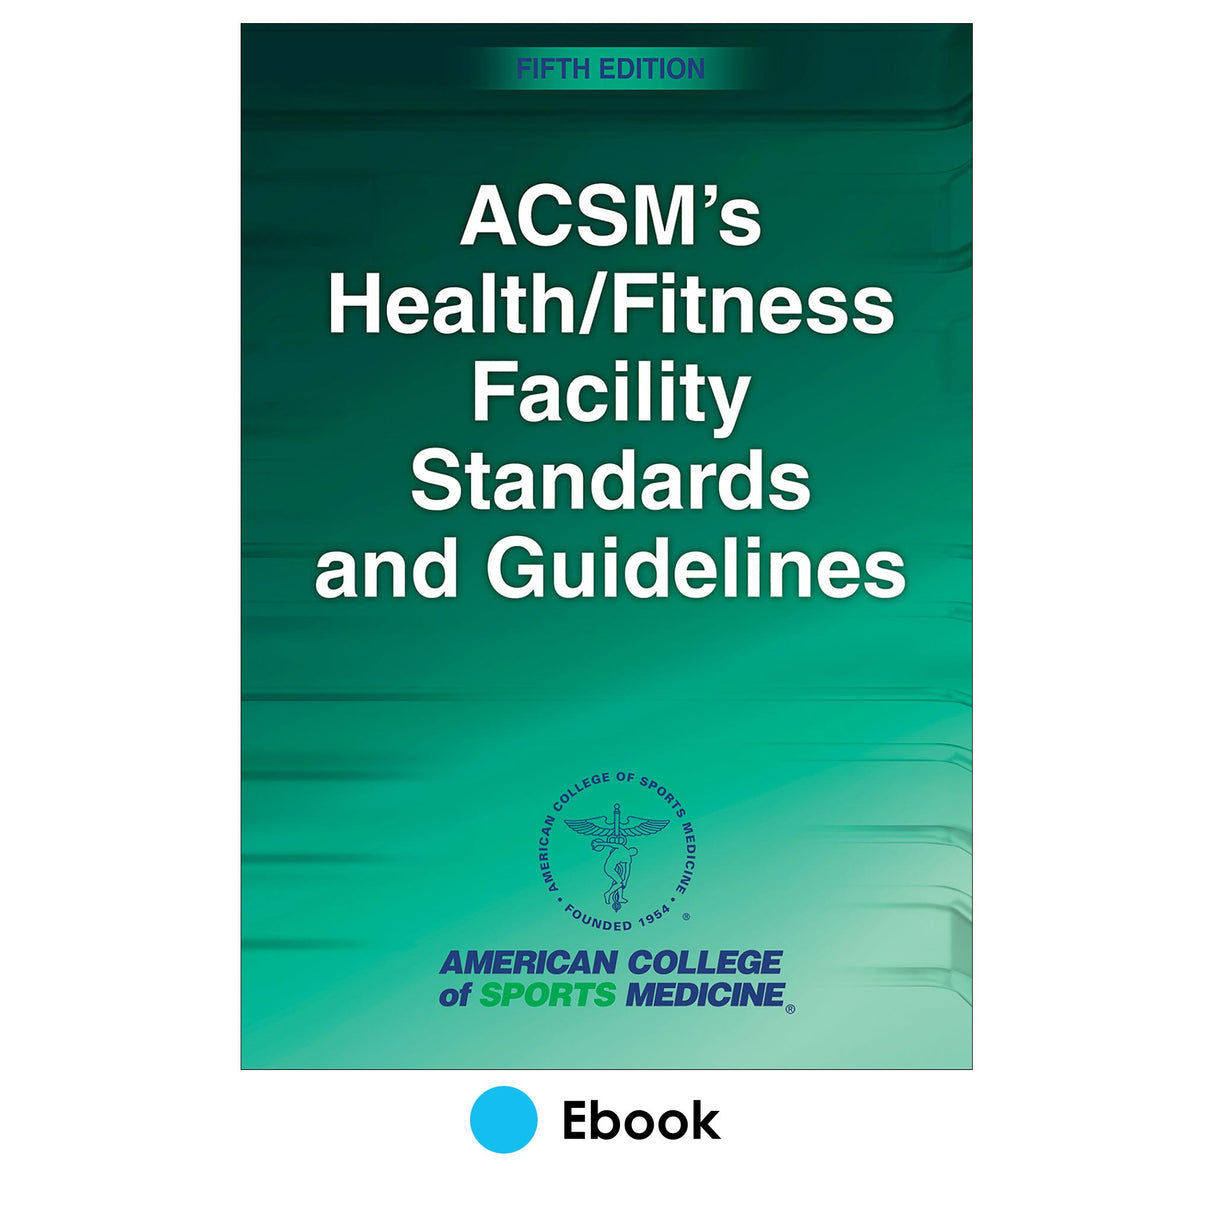 ACSM's Health/Fitness Facility Standards and Guidelines 5th Edition epub